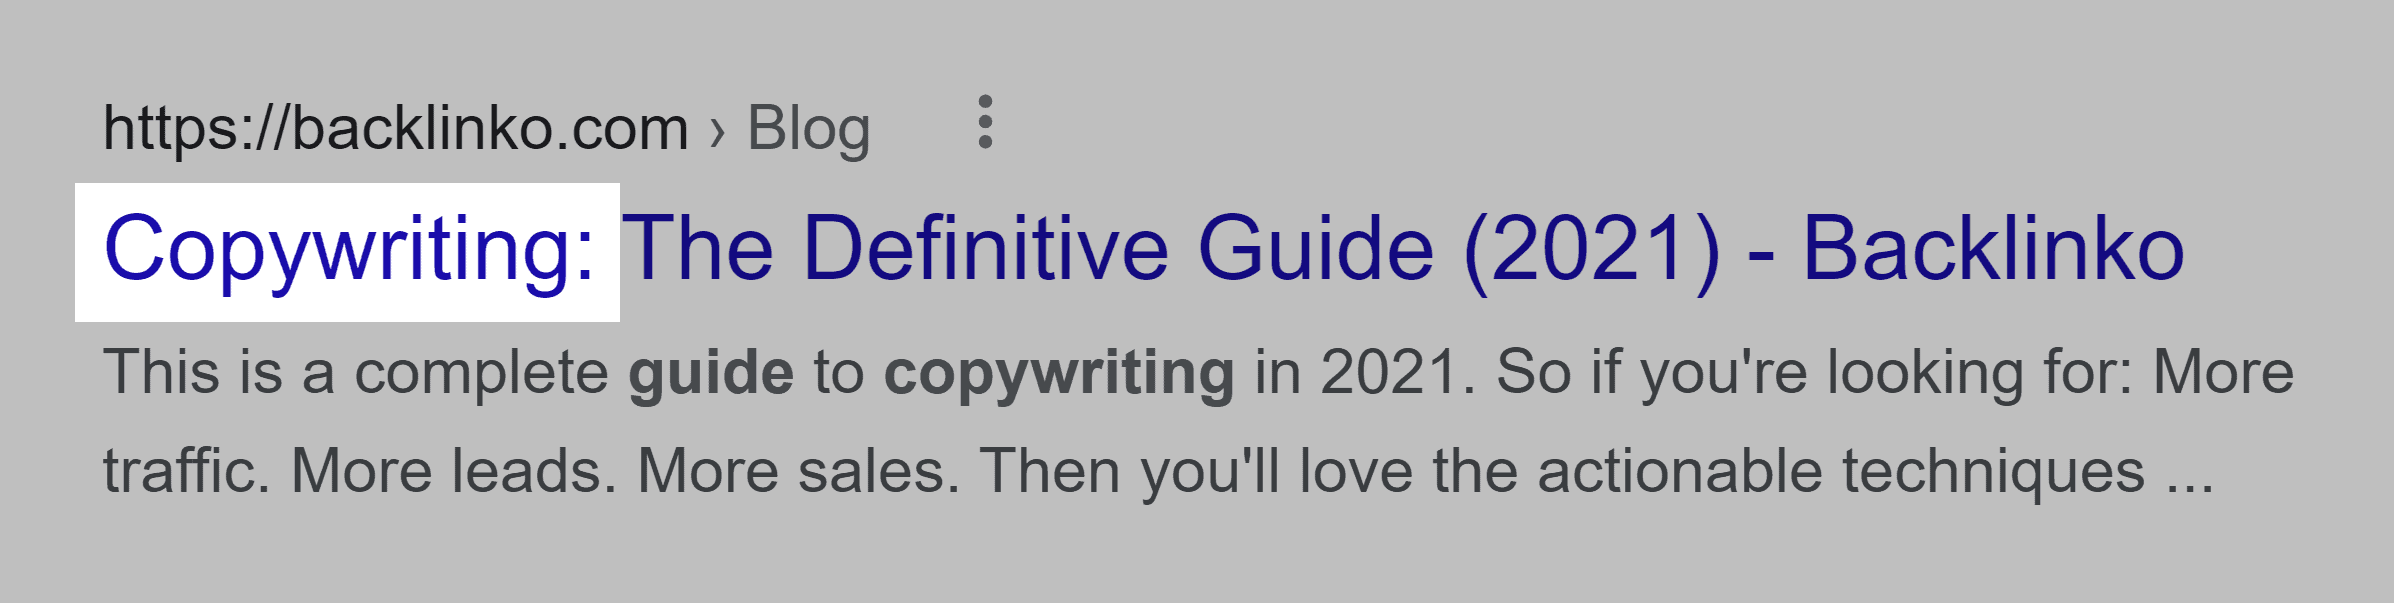 Copywriting guide – Keyword in title